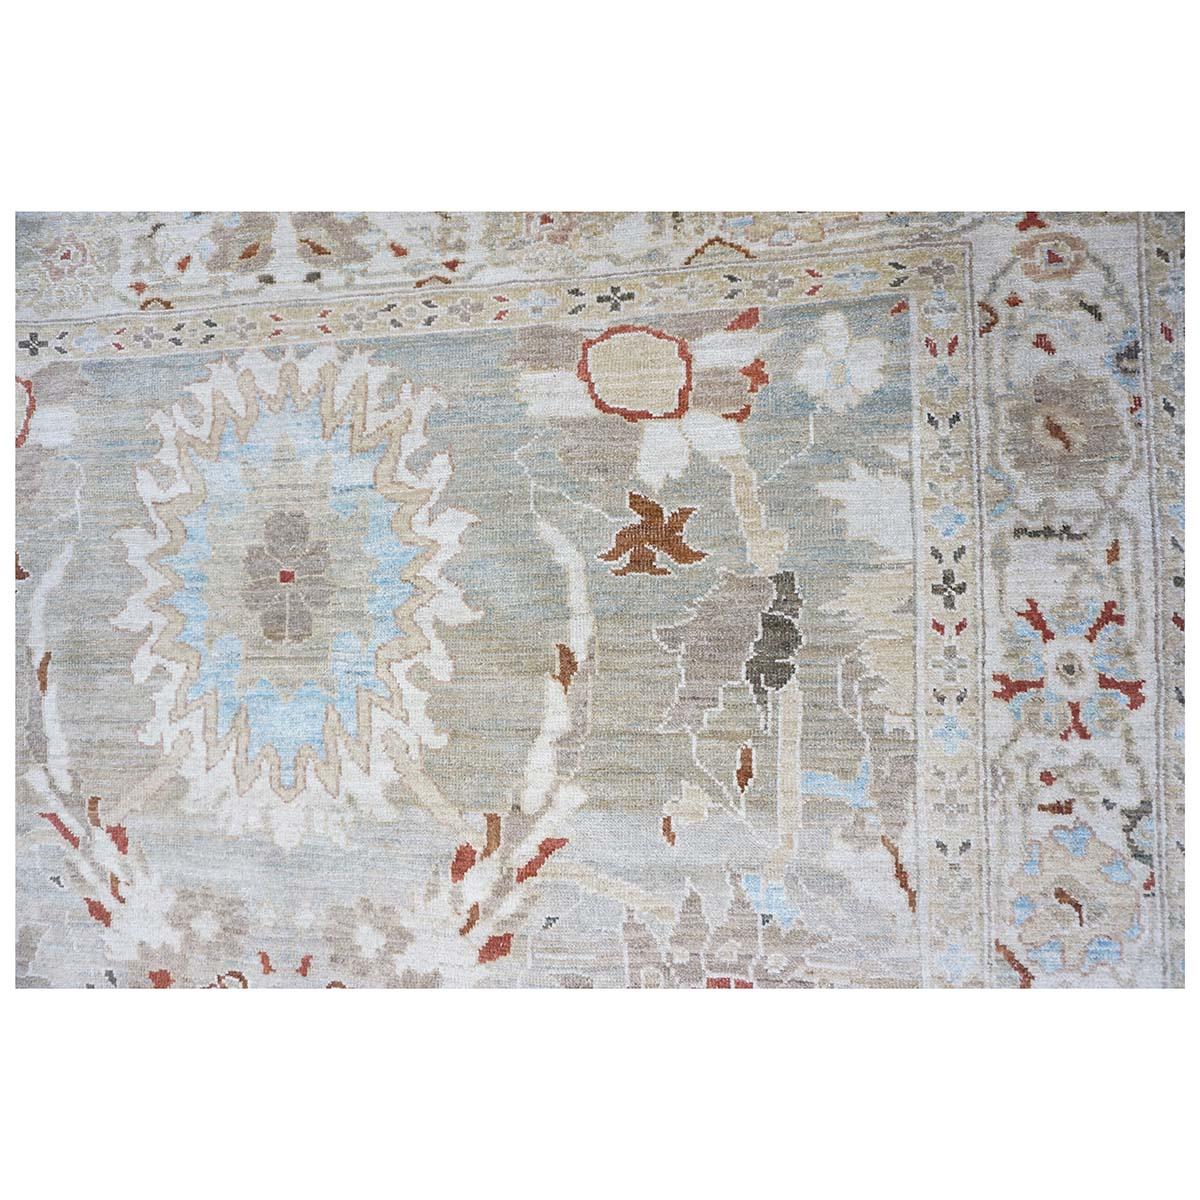 21st Century Persian Sultanabad 8x8 Square Tan, Blue, & Ivory Handmade Area Rug In Excellent Condition For Sale In Houston, TX